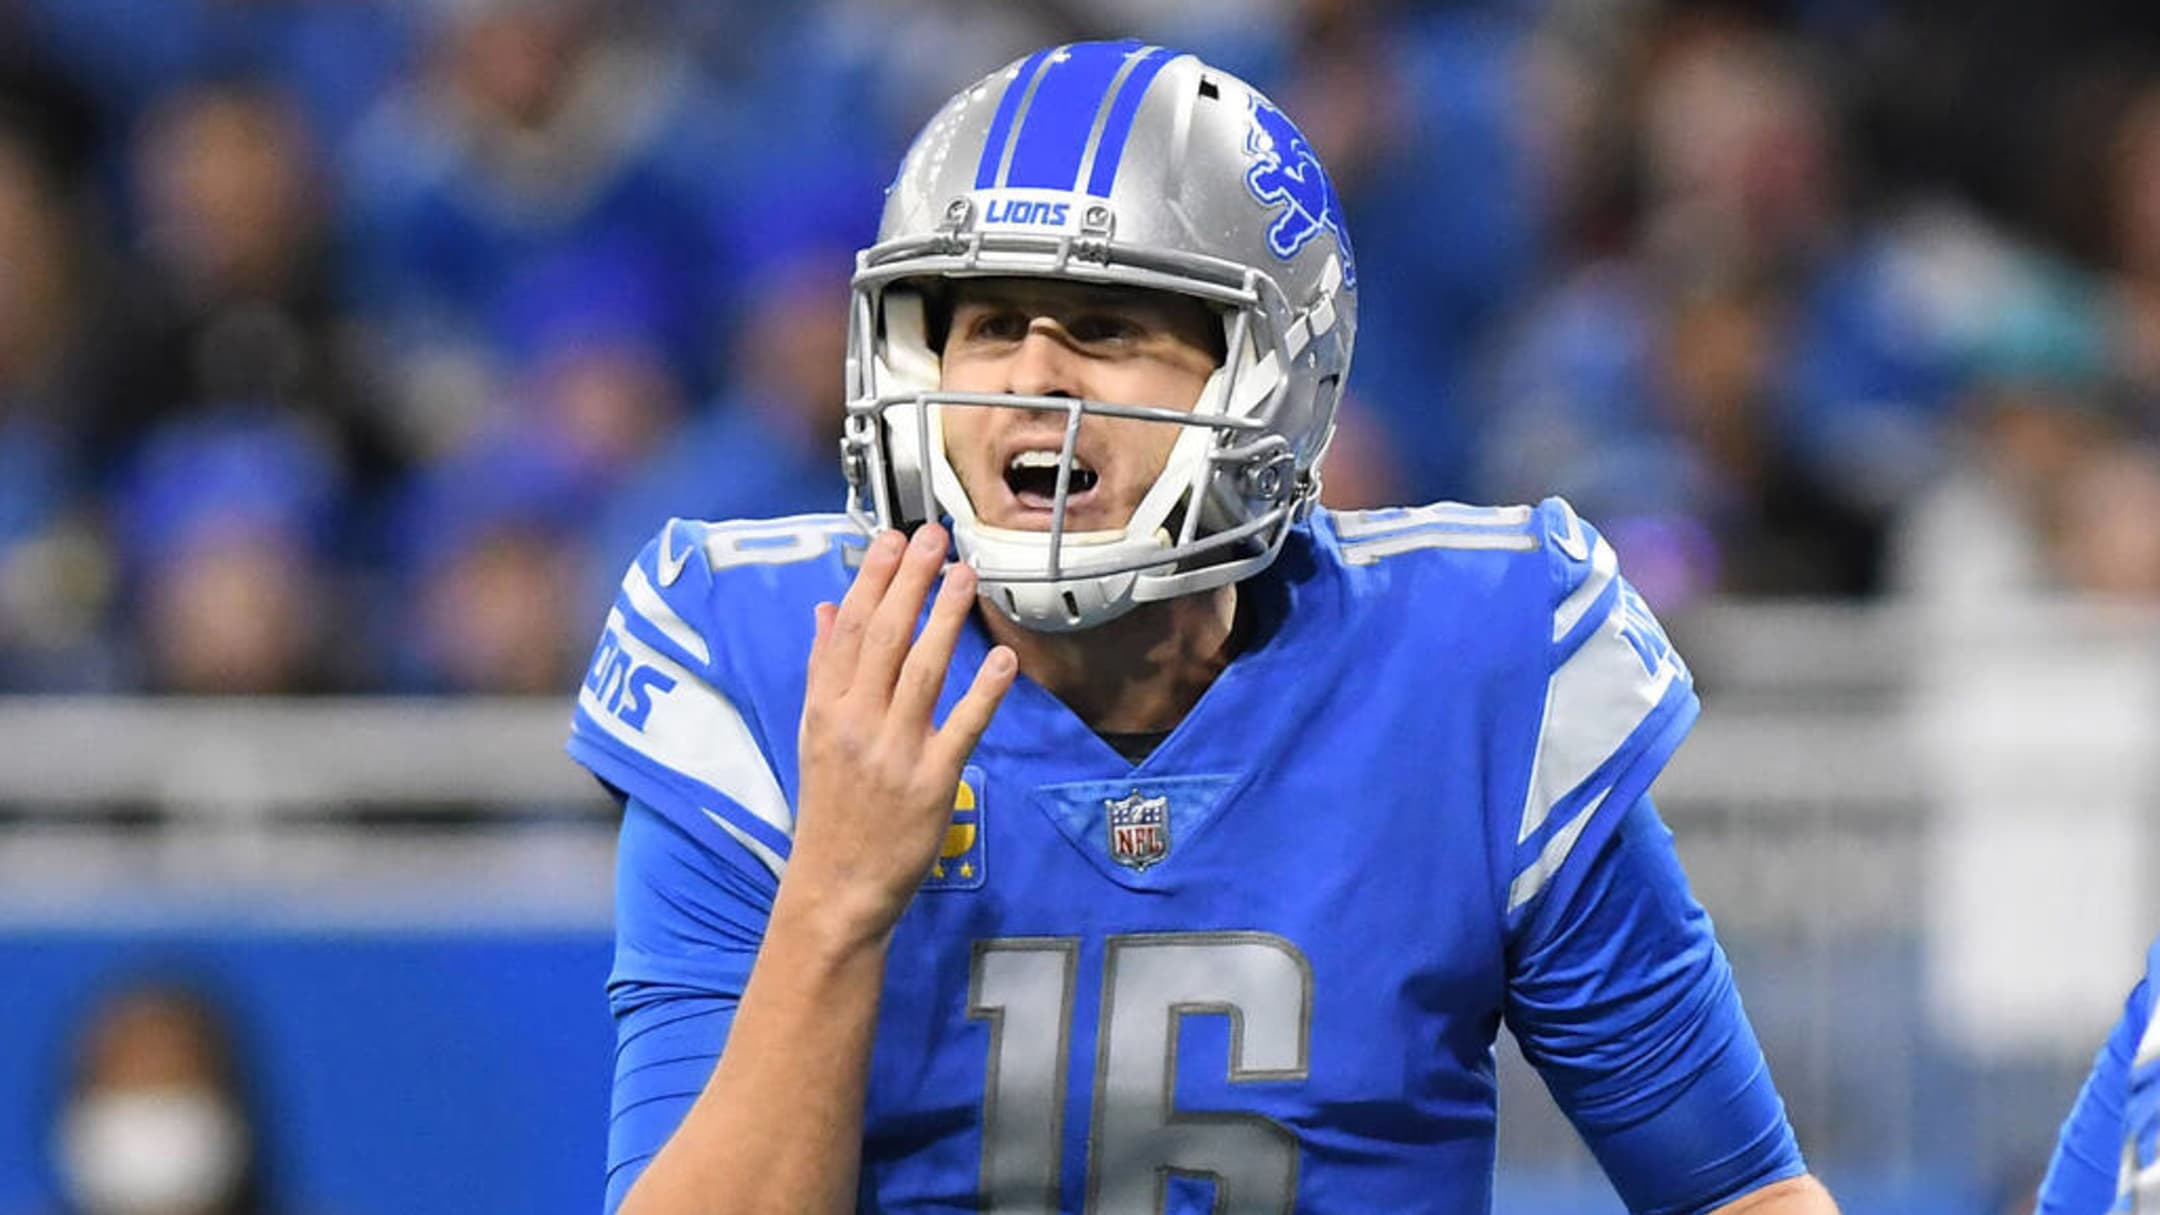 Detroit Lions Will Make the Super Bowl If They Fix This One Glaring Need